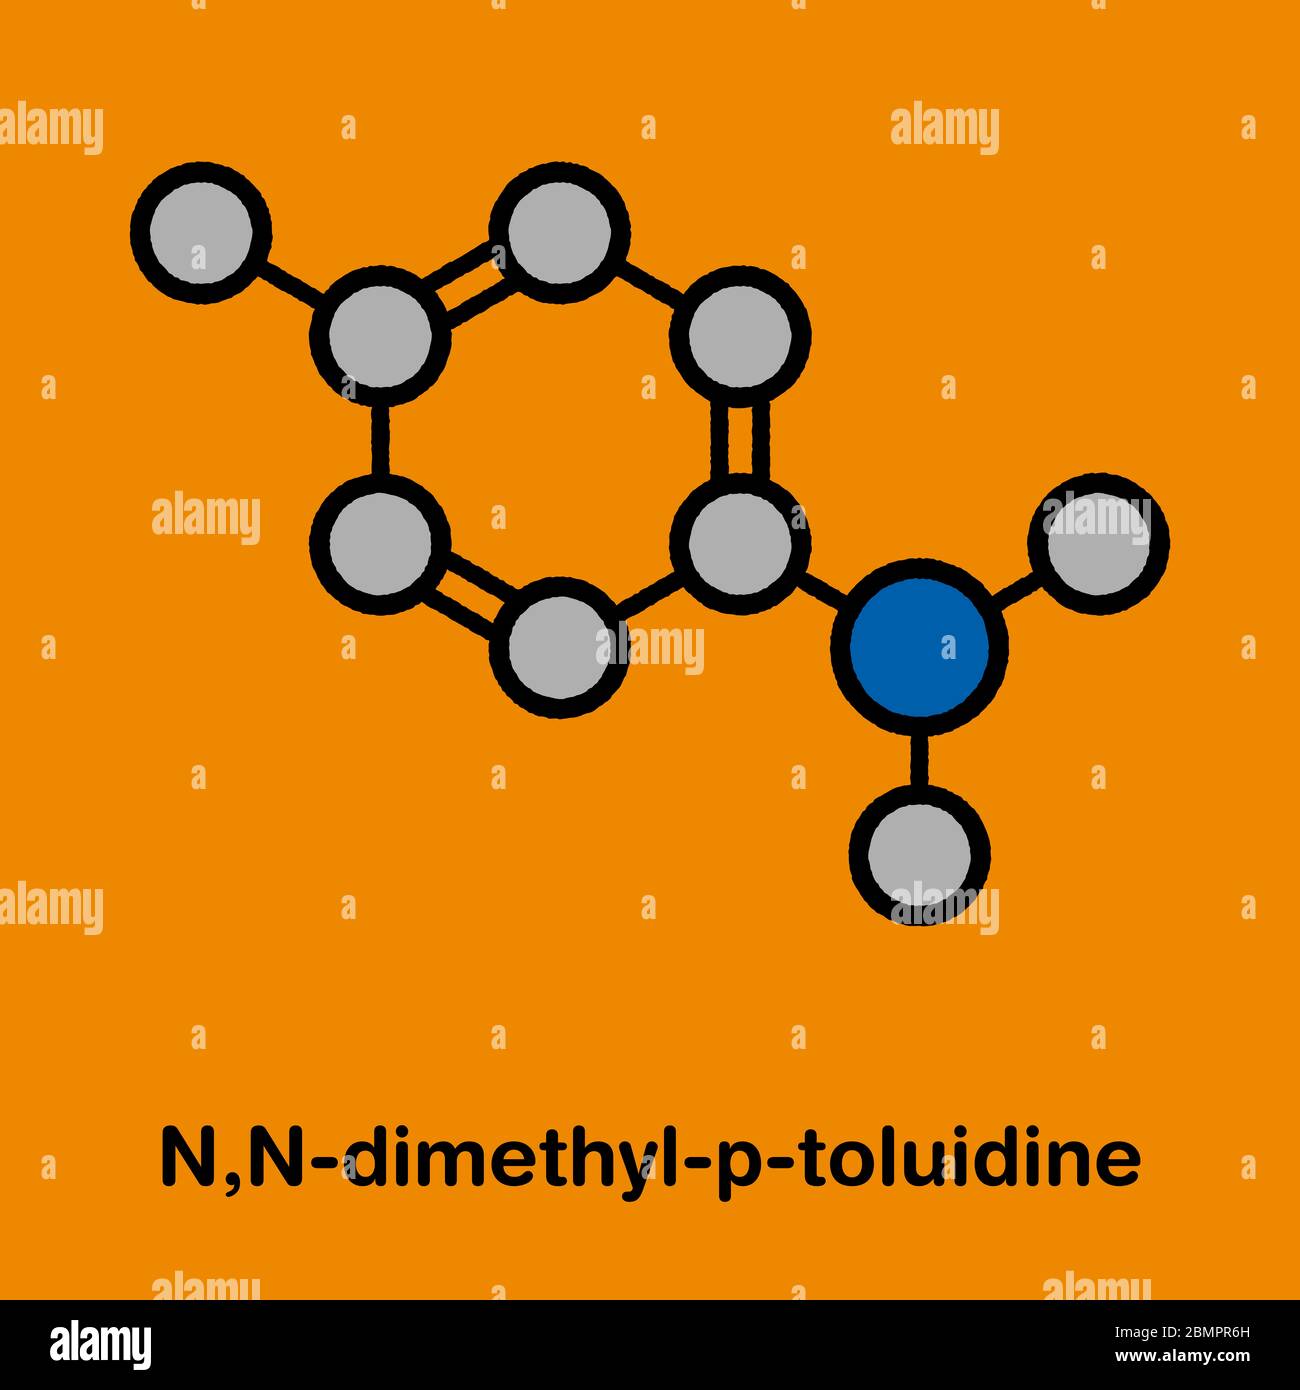 N,N-dimethyl-p-toluidine (DMPT) molecule. Commonly used as catalyst in the production of polymers and in dental materials and bone cements. Stylized skeletal formula (chemical structure): Atoms are shown as color-coded circles: hydrogen (hidden), carbon (grey), oxygen (red), nitrogen (blue). Stock Photo